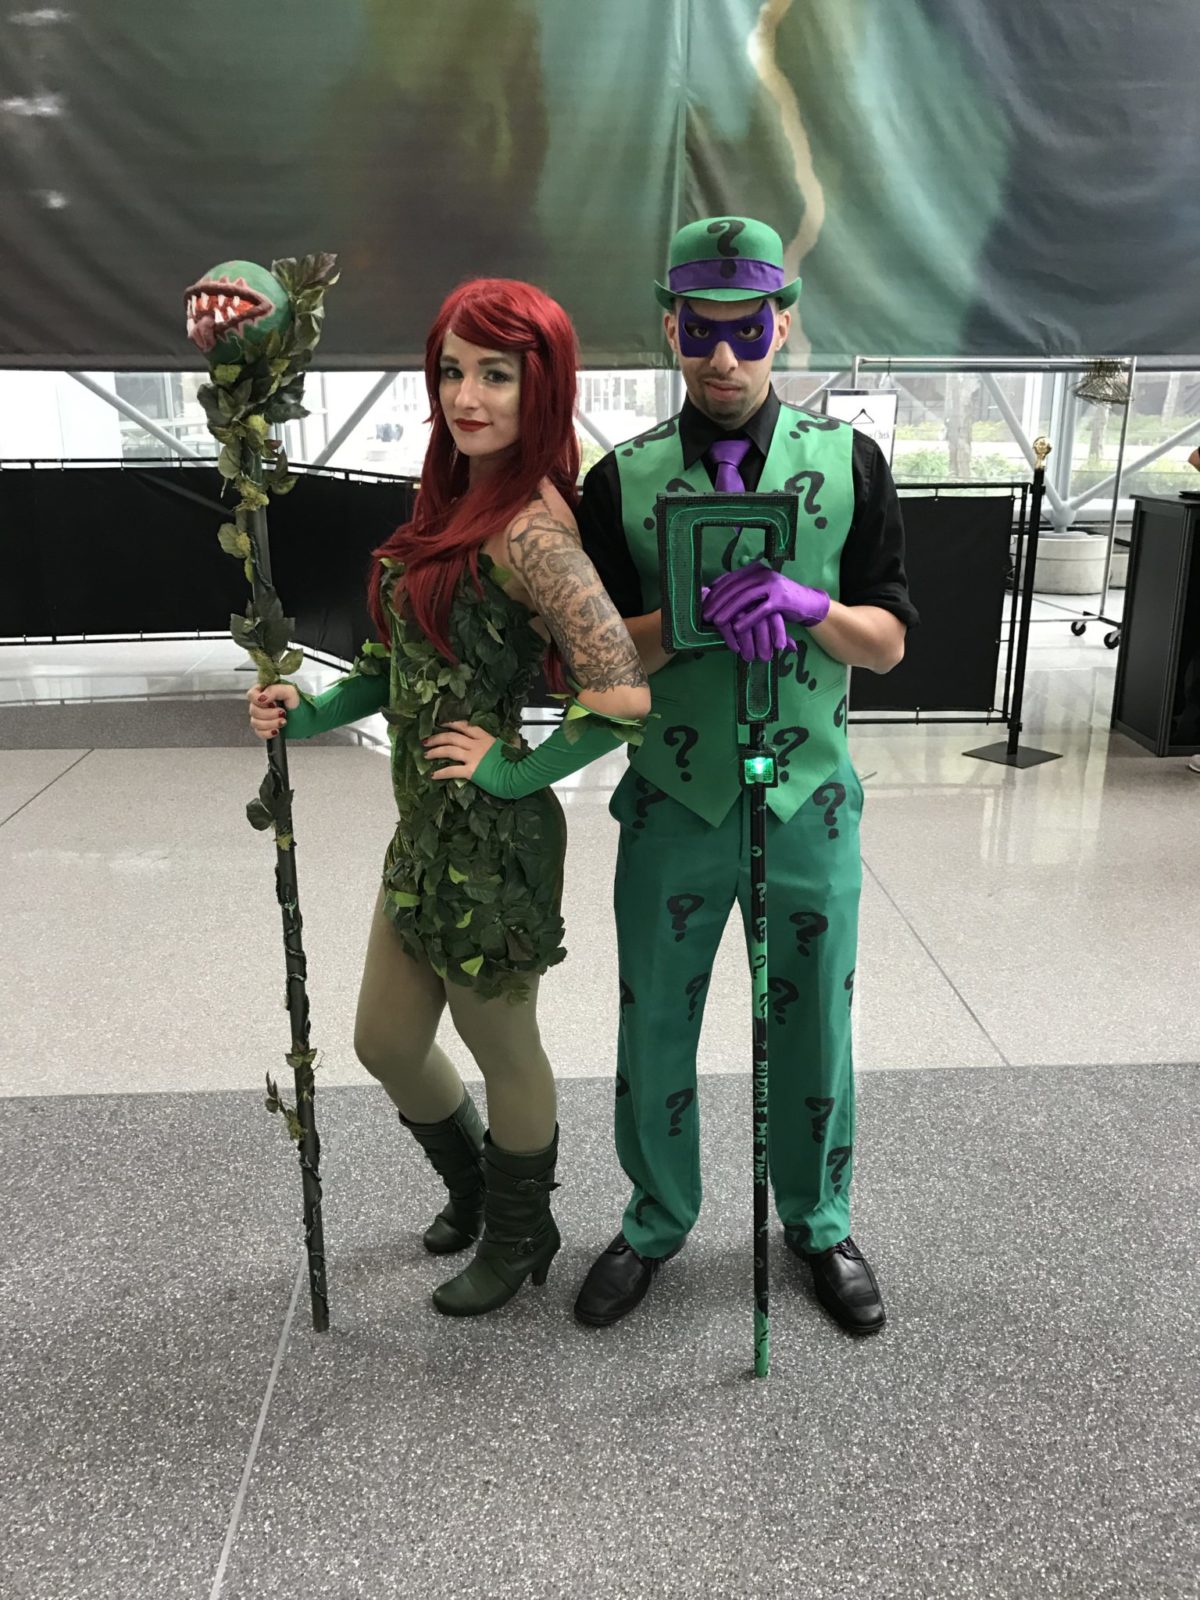 A Devious duo kicks off CosView day 3 NYCC  .THROW BACK to 2016